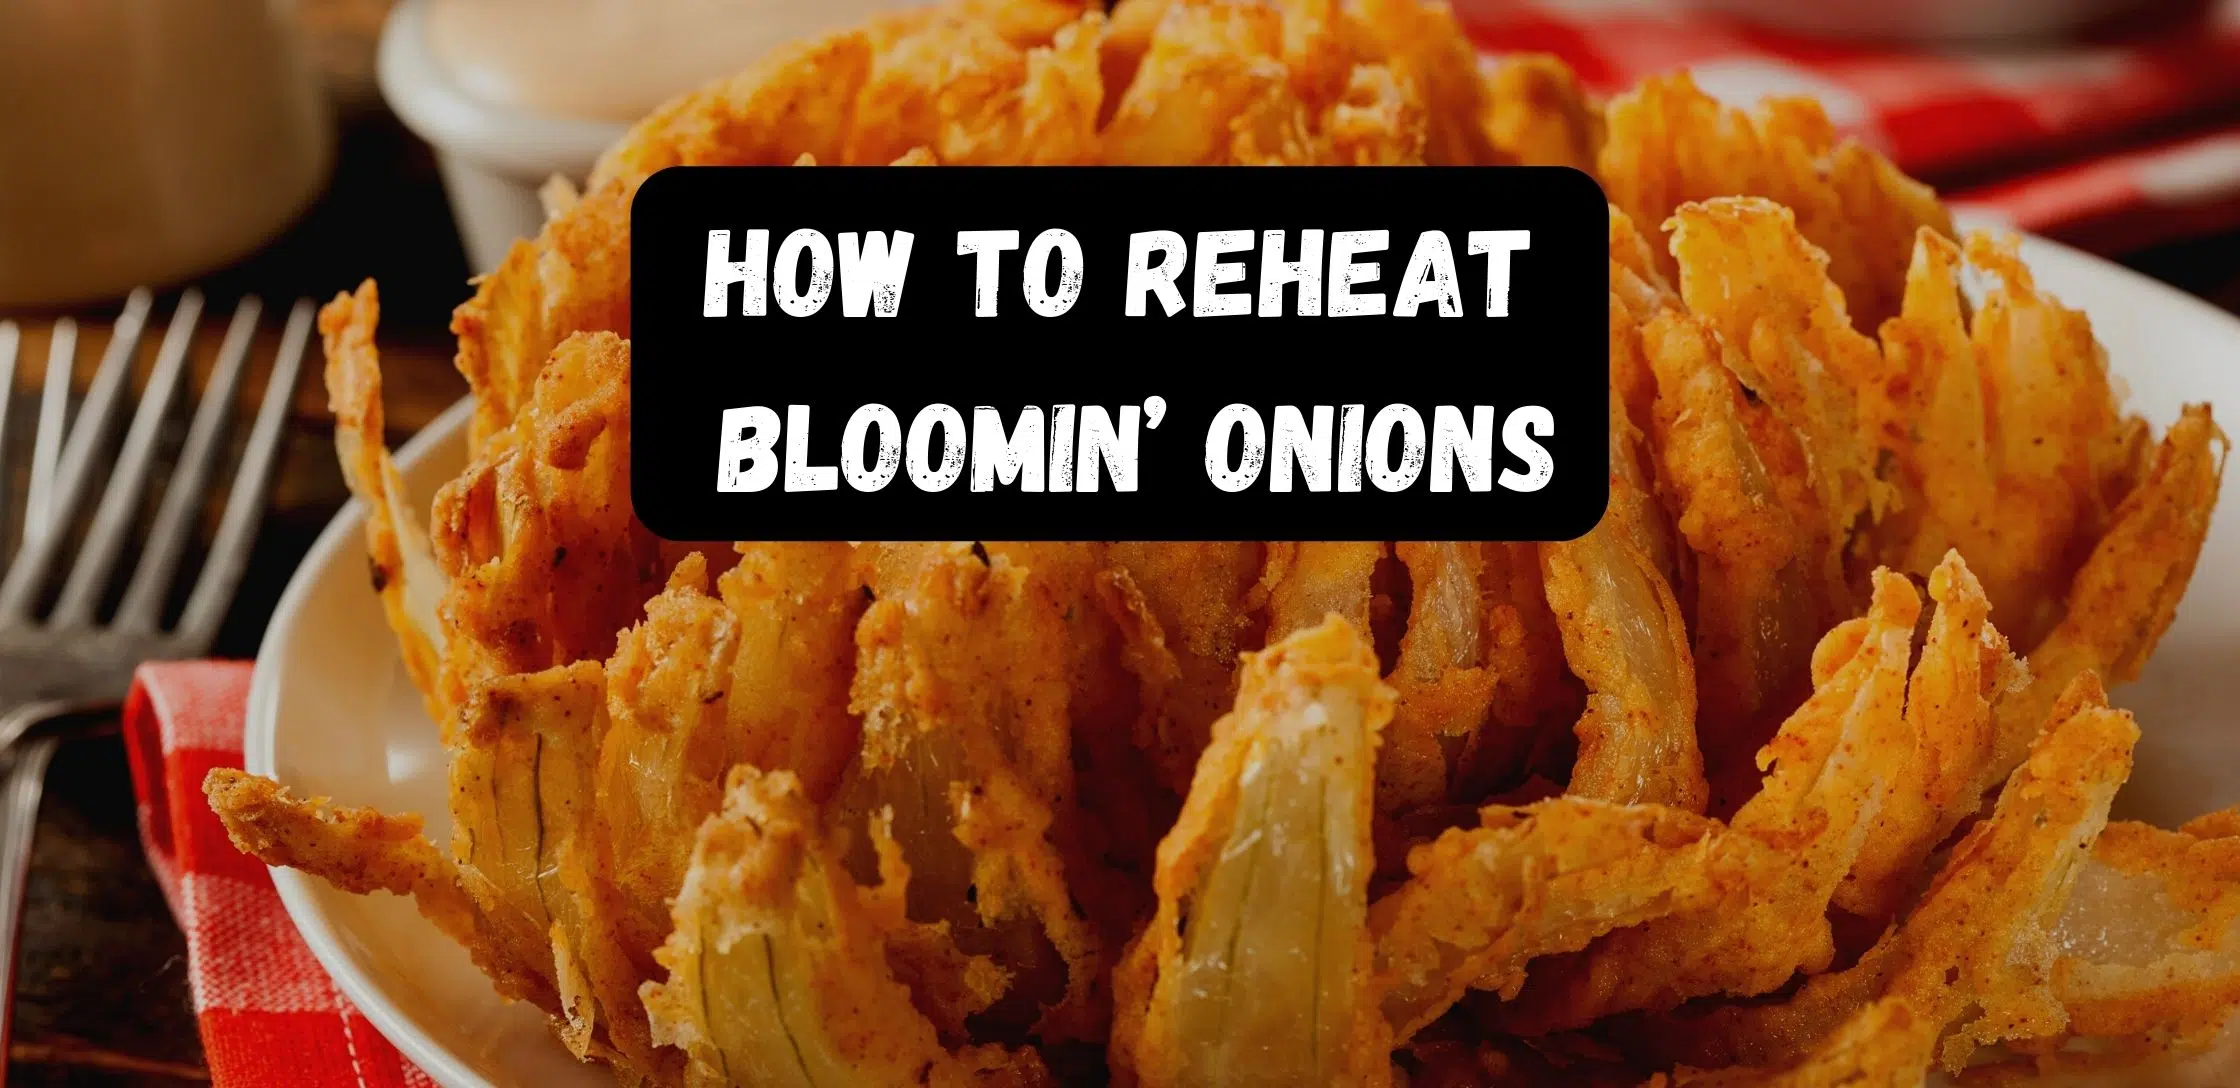 Revive the Flavor: Easy Methods for Reheating a Bloomin